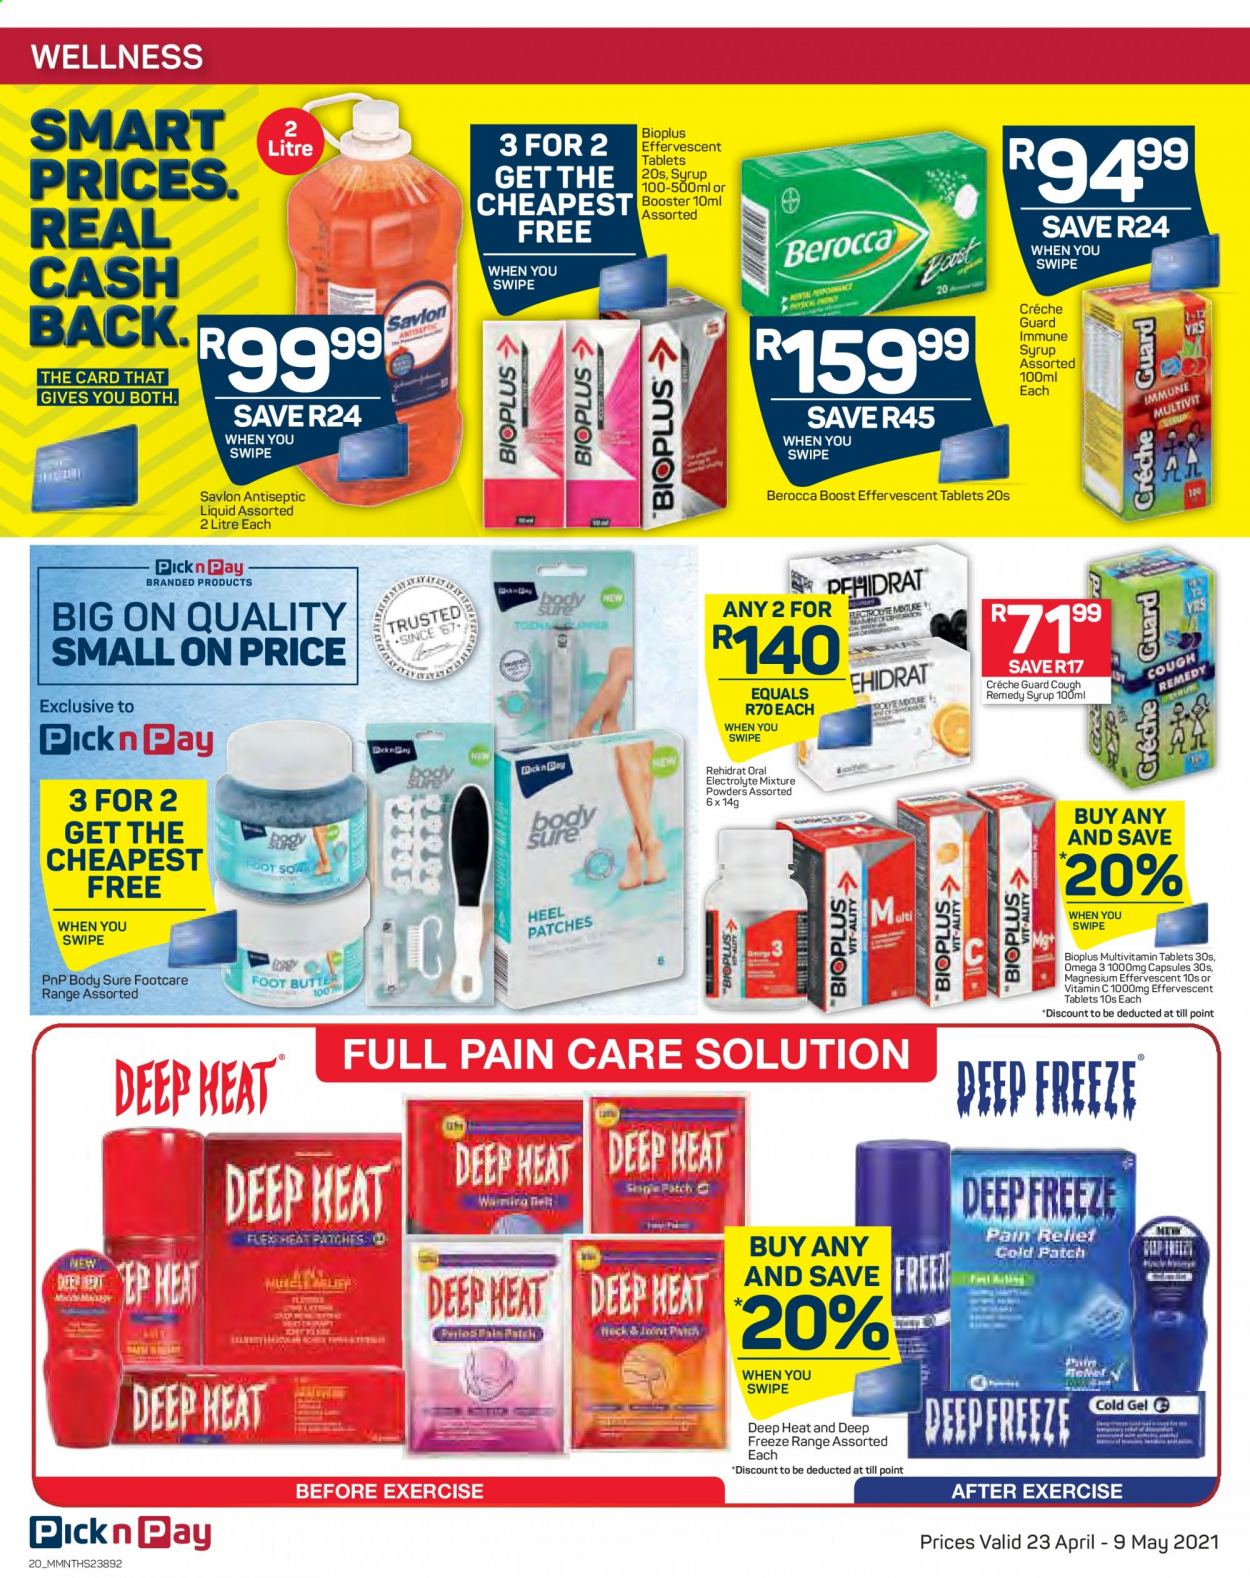 Pick n Pay specials - 04.23.2021 - 05.09.2021. 